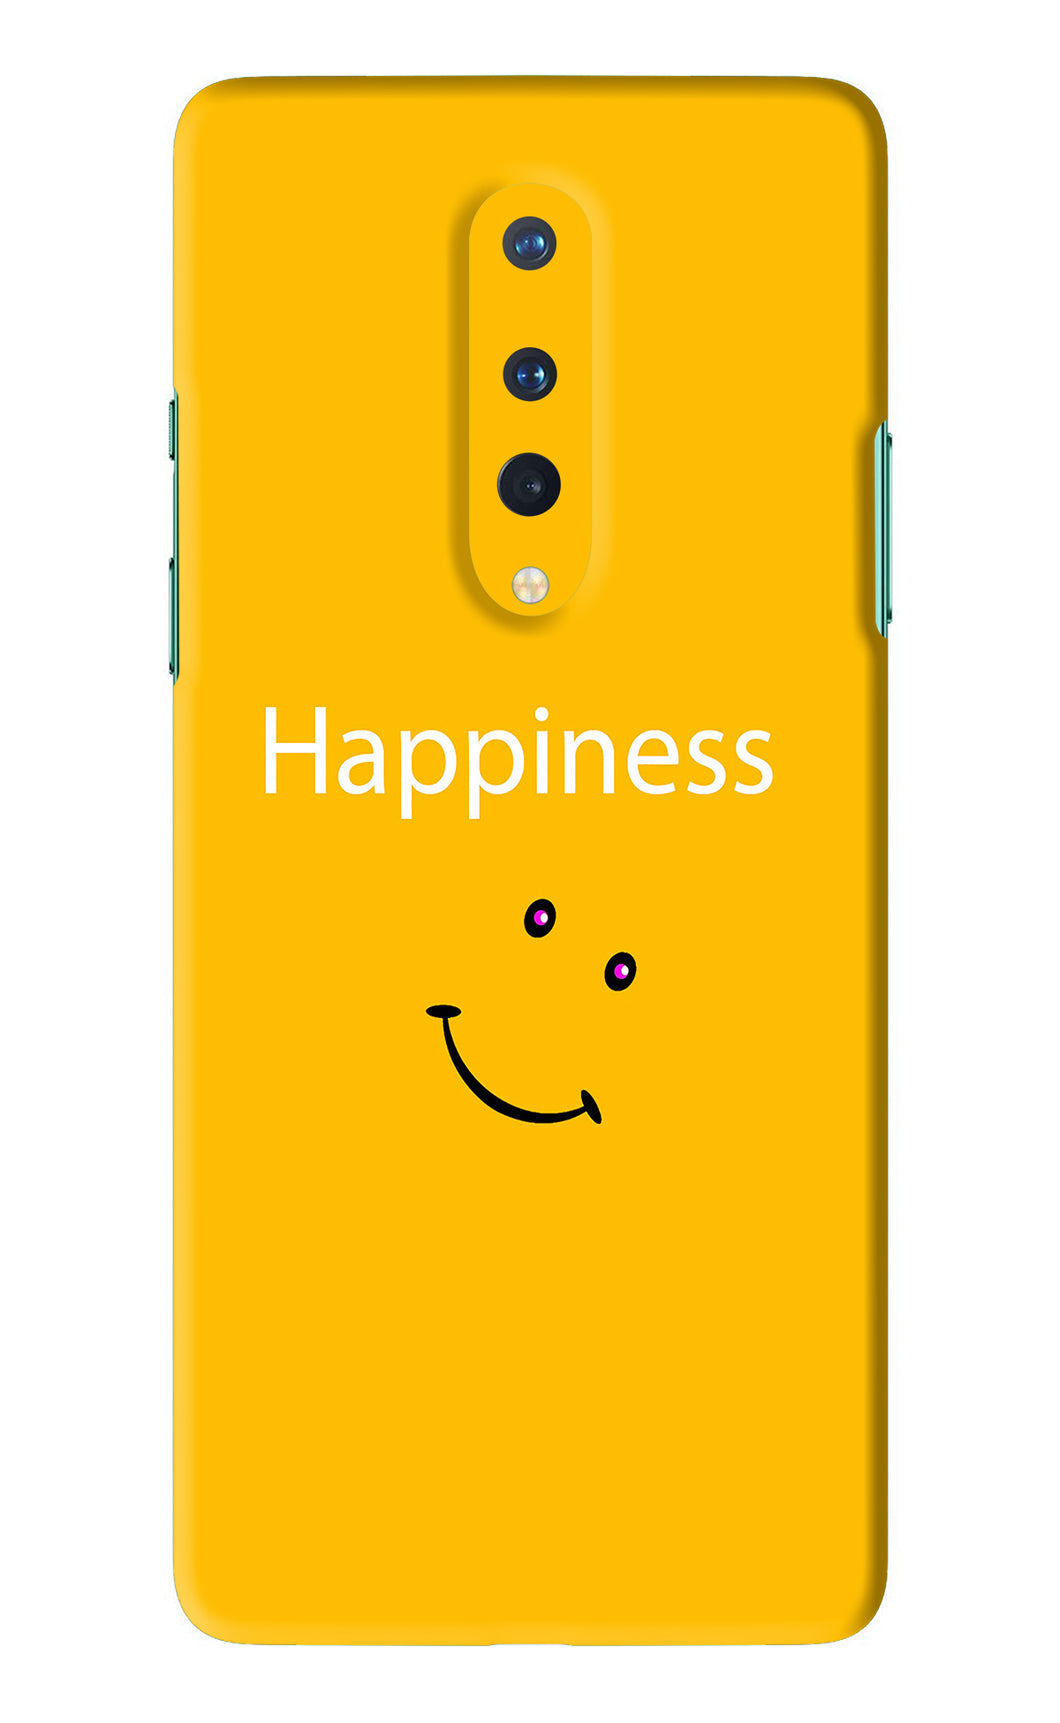 Happiness With Smiley OnePlus 8 Back Skin Wrap